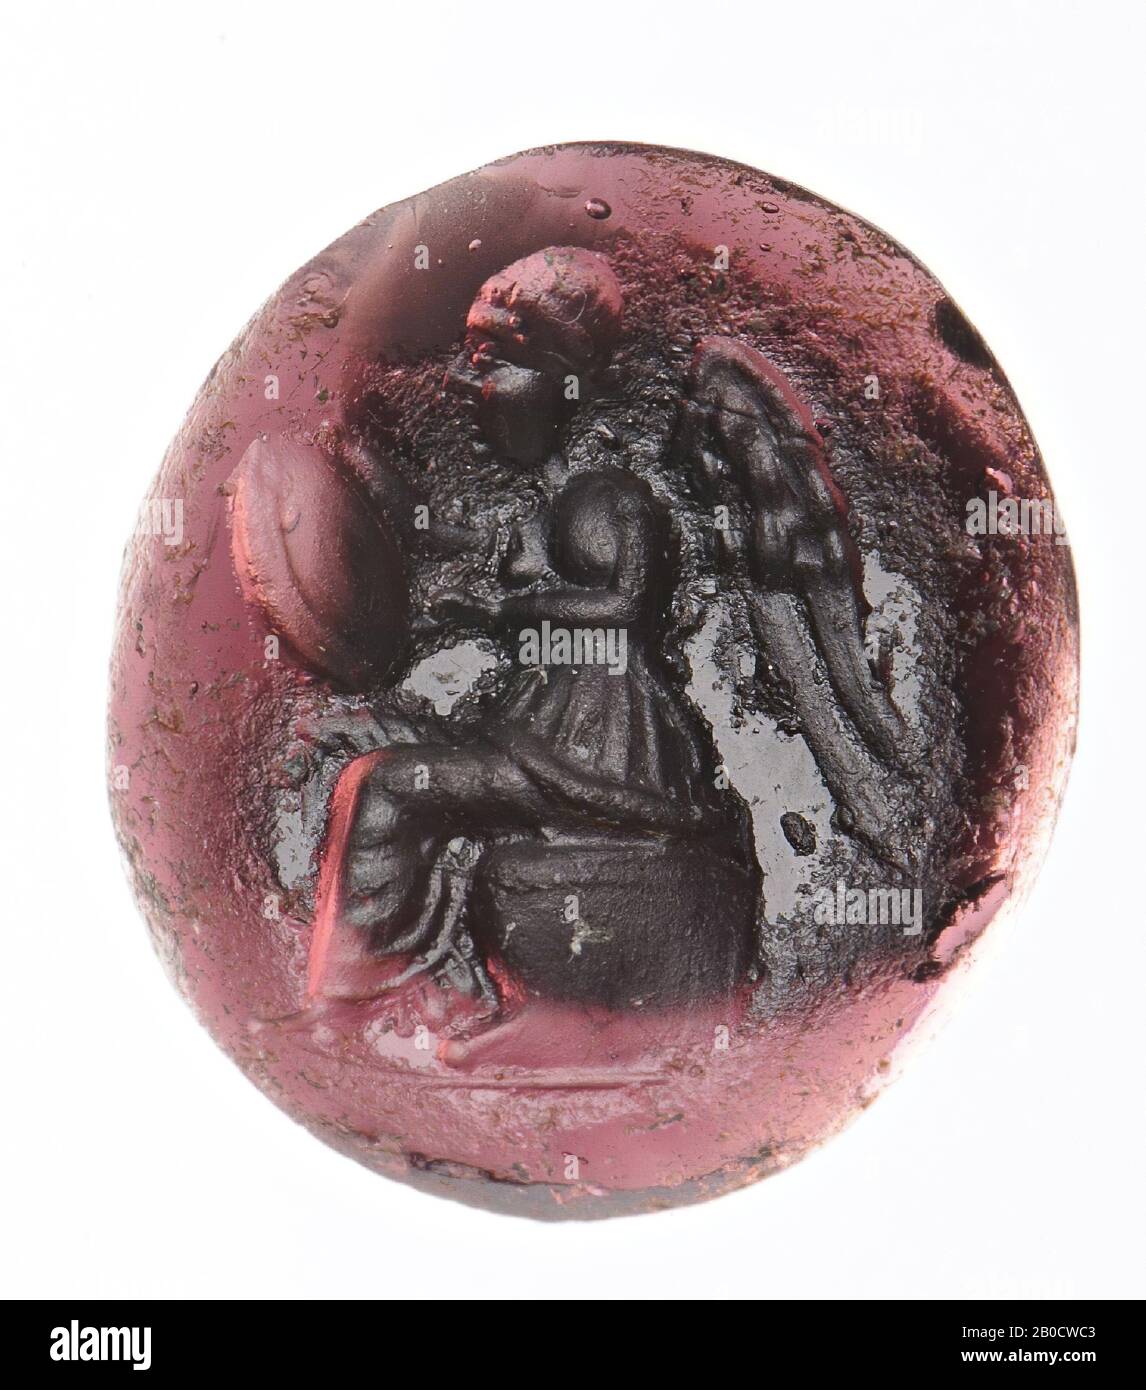 Vz: the goddess is dressed in a chiton with long cover (apoptygma) and sits on a throne with lions' legs, she has a round shield on her knees with her right hand and writes on it with her left hand., Gem, intaglio , glass paste, Color: brown, Shape: oval, Machined: Maaskant-Kleibrink, M., Catalog of the engraved gems in the Royal Coin Cabinet, 1978, p.60, fig.2, type 3C, front convex, Type: body modeling with rounded drills, details not clear, 13 x 12 mm, D. 5.5 mm, 2nd century BC. -200 Stock Photo